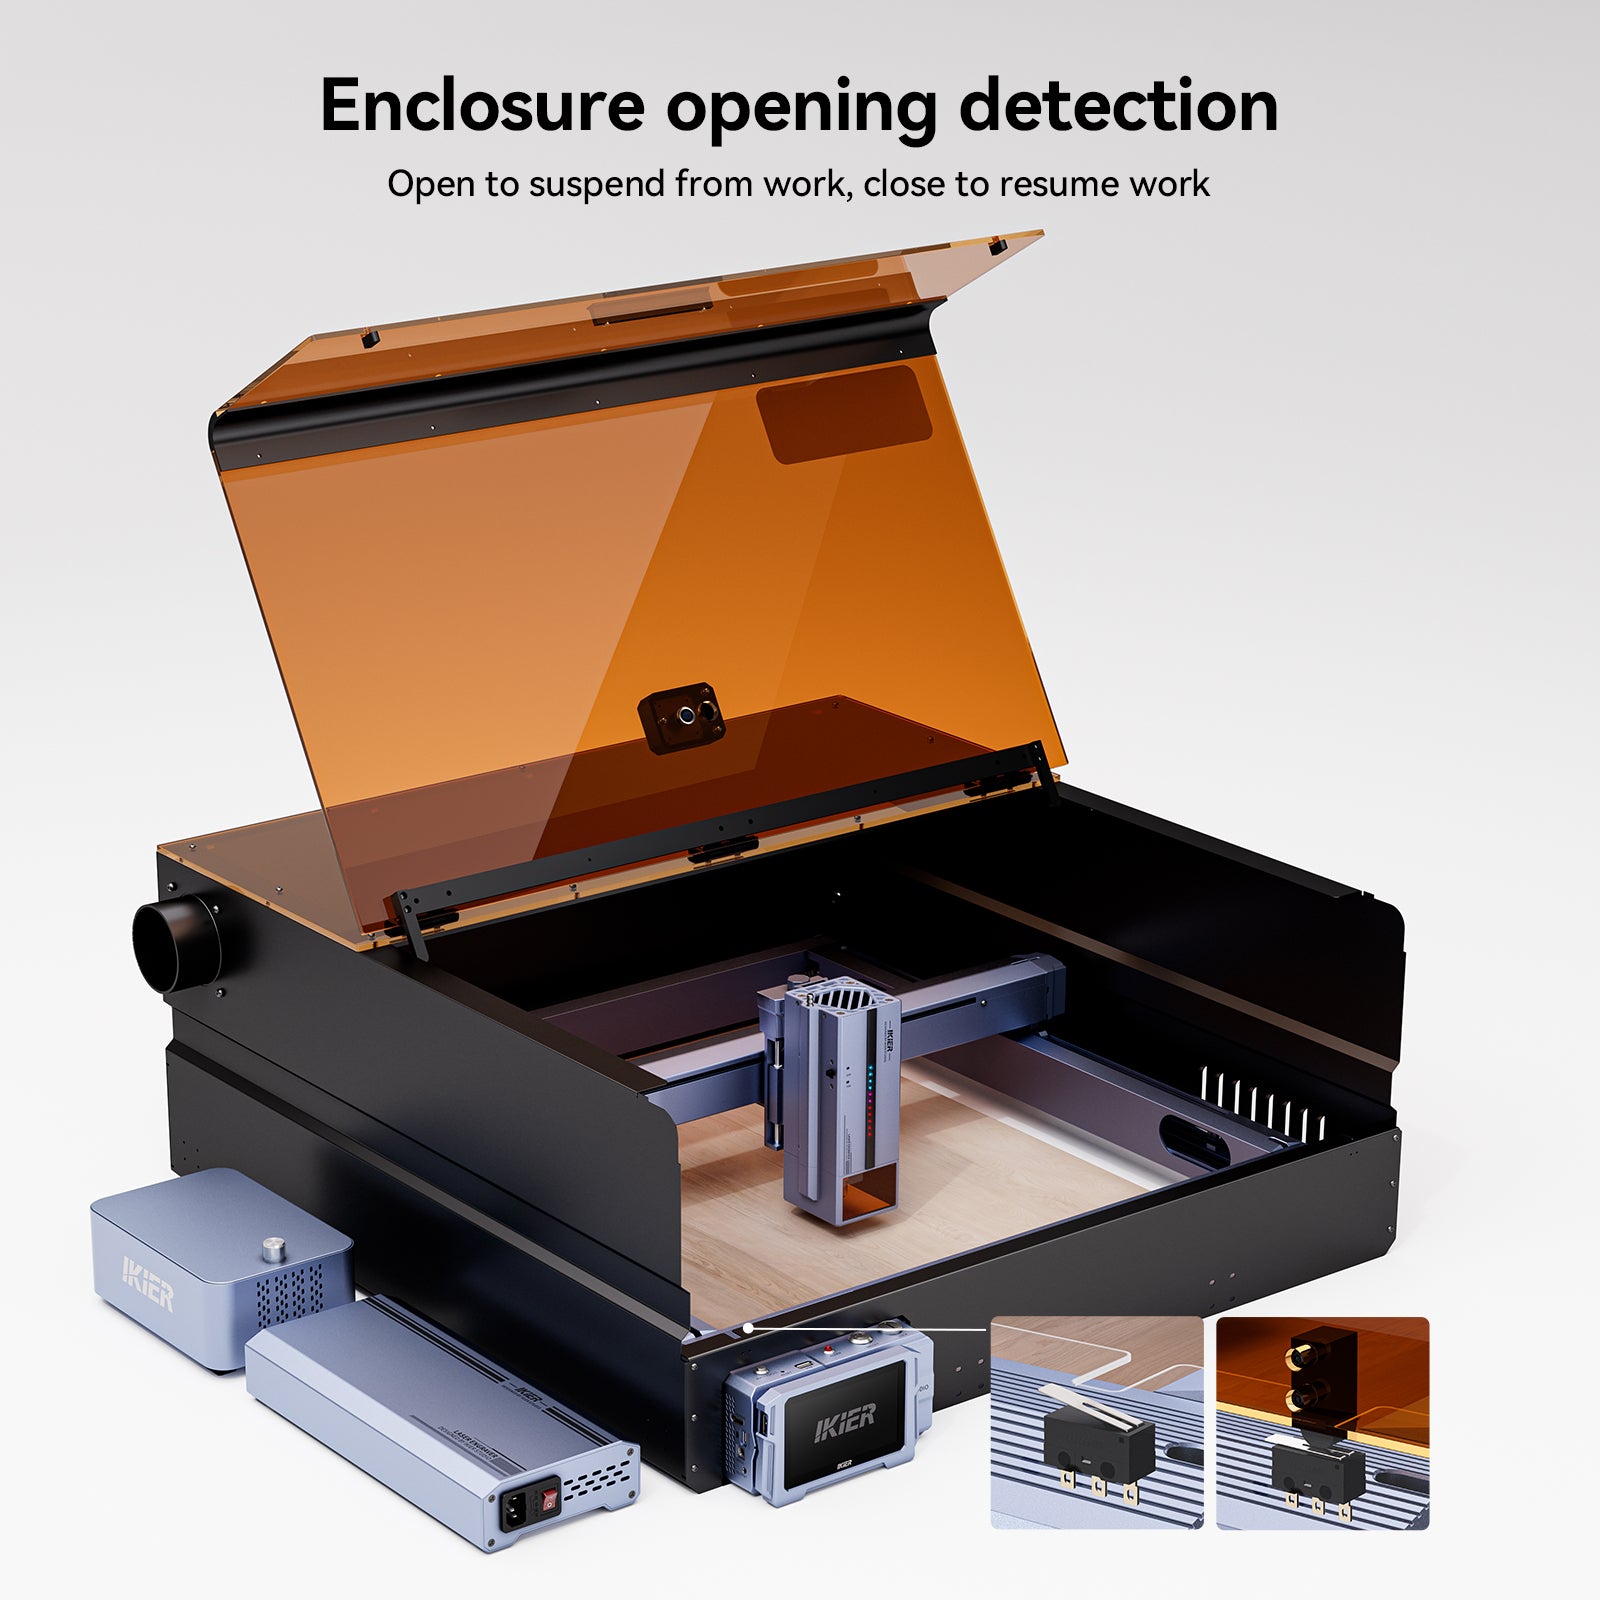 iKier E2 Enclosure with Camera For K1 Series Laser Engraver [Pre-order]